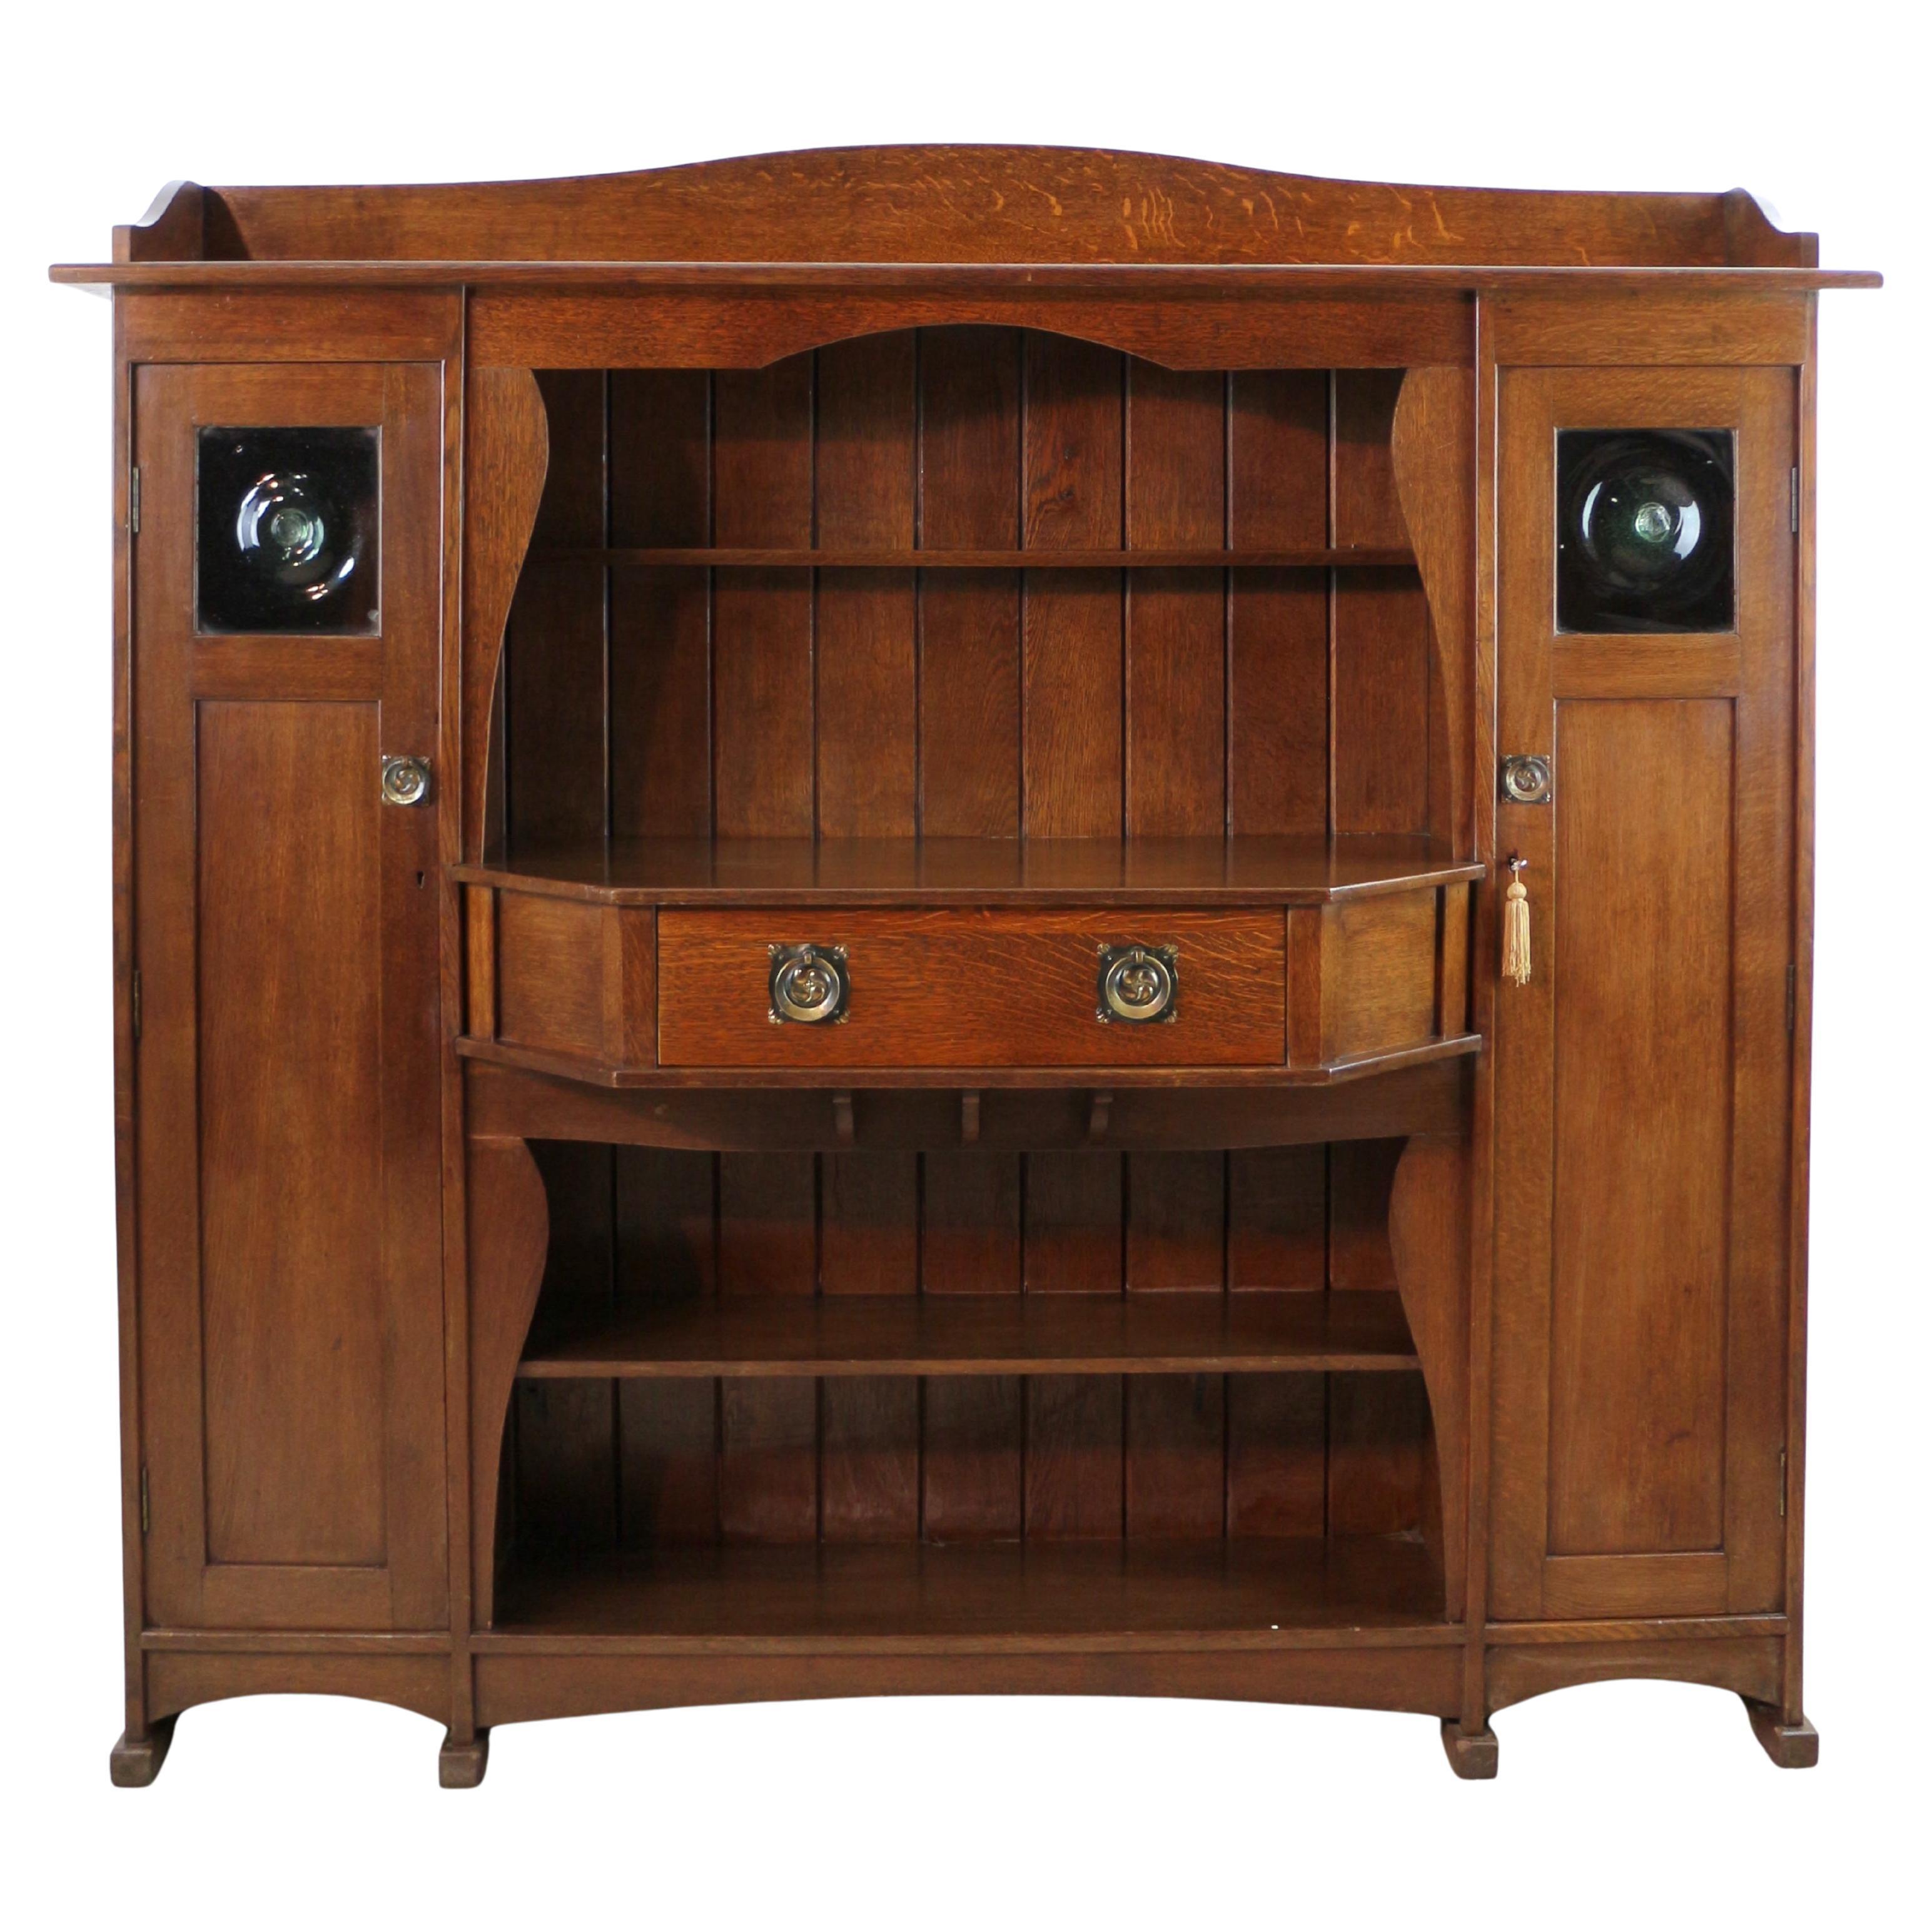 Antique English Liberty & Co Arts & Crafts Oak Hathaway Sideboard or Dresser For Sale